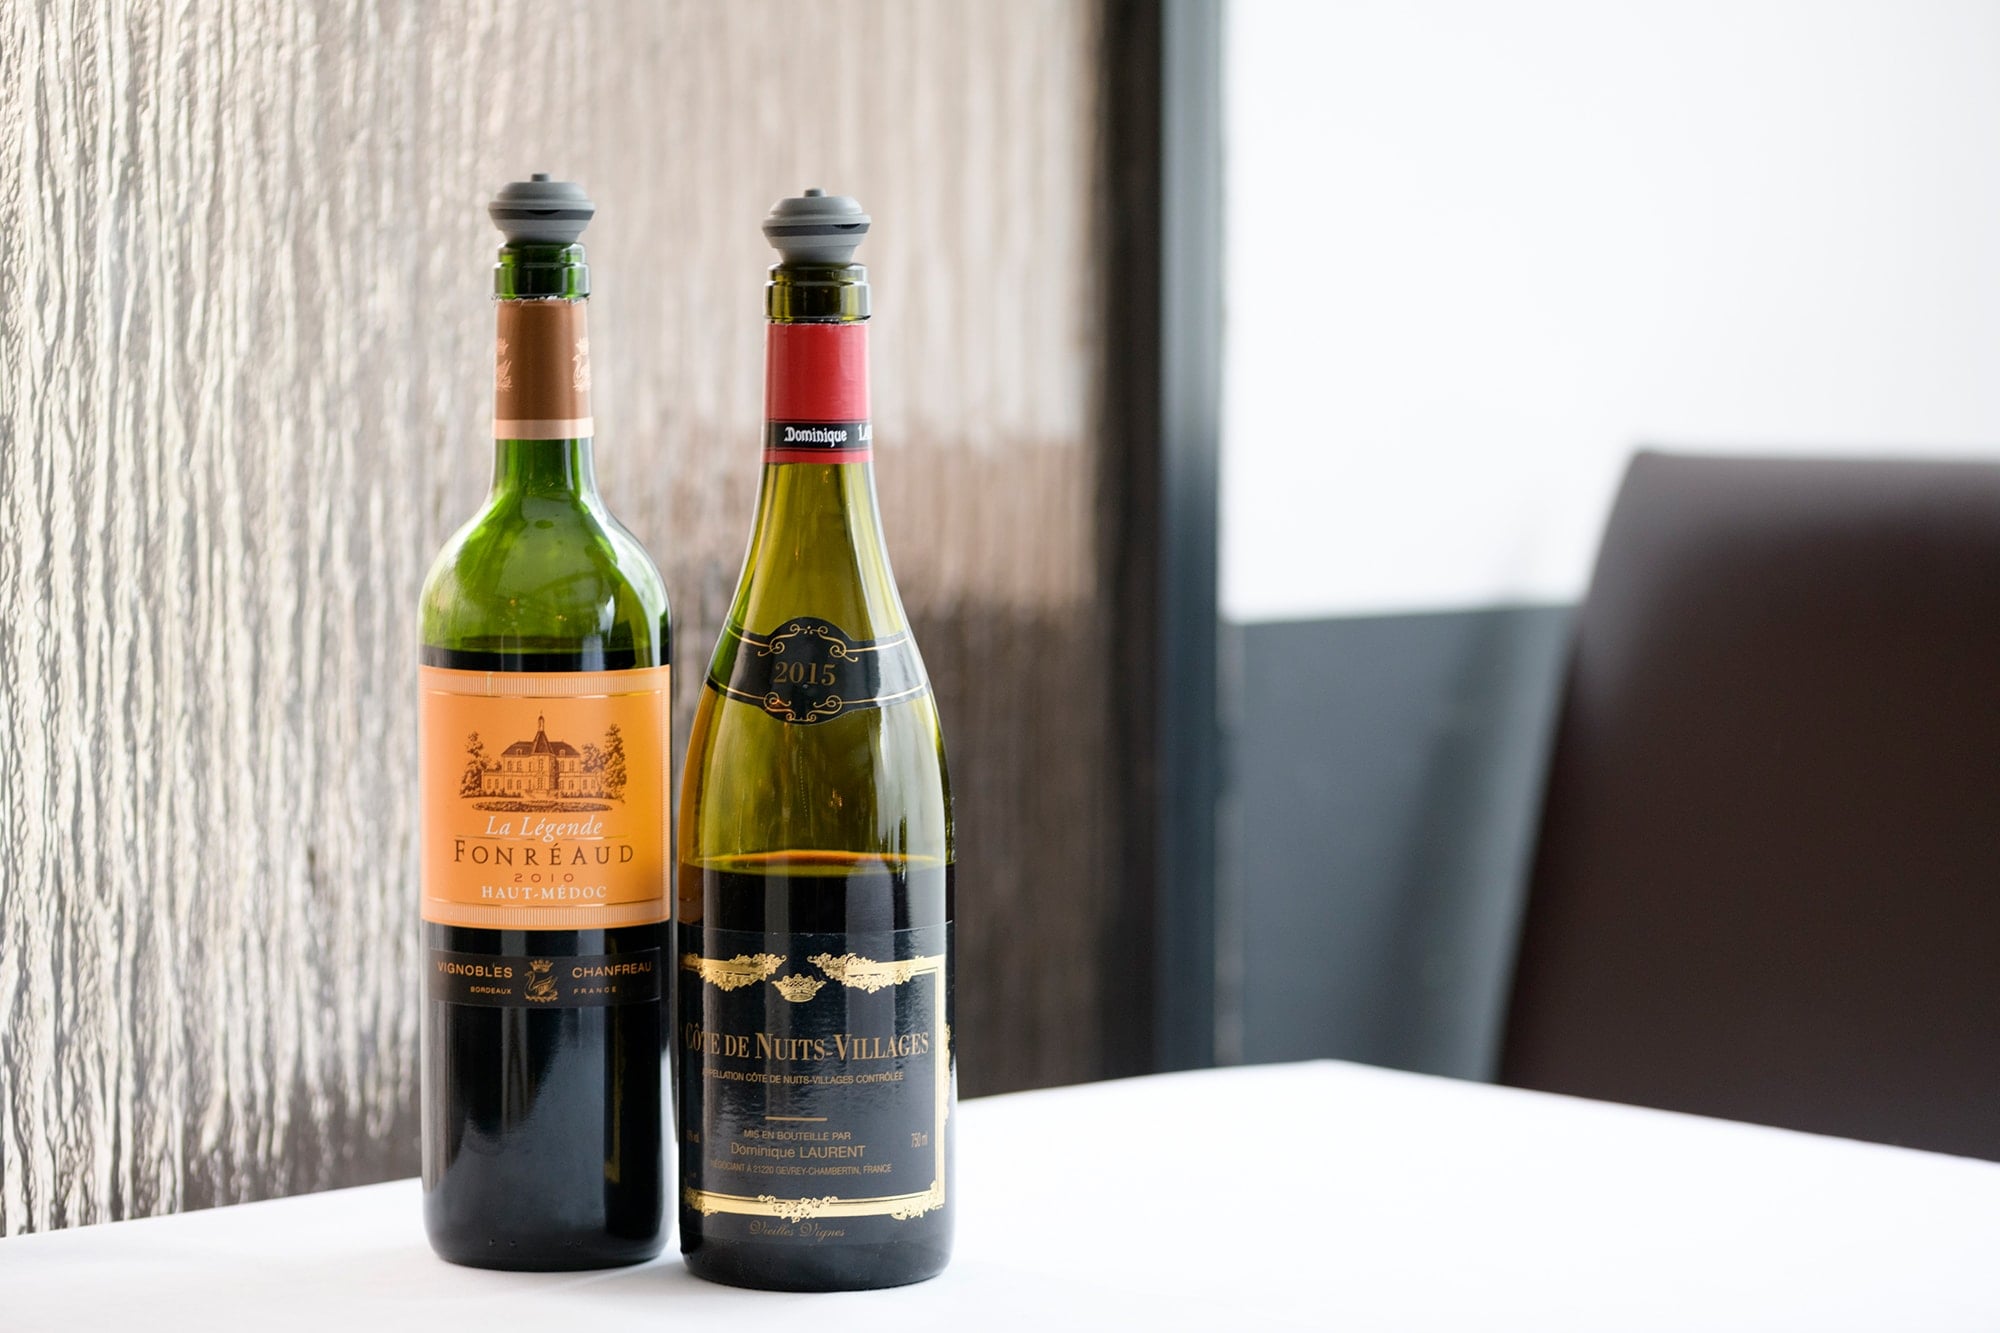 The restaurant offers numerous options of wine by the glass. The wines are mainly from France and selected by the sommelier.